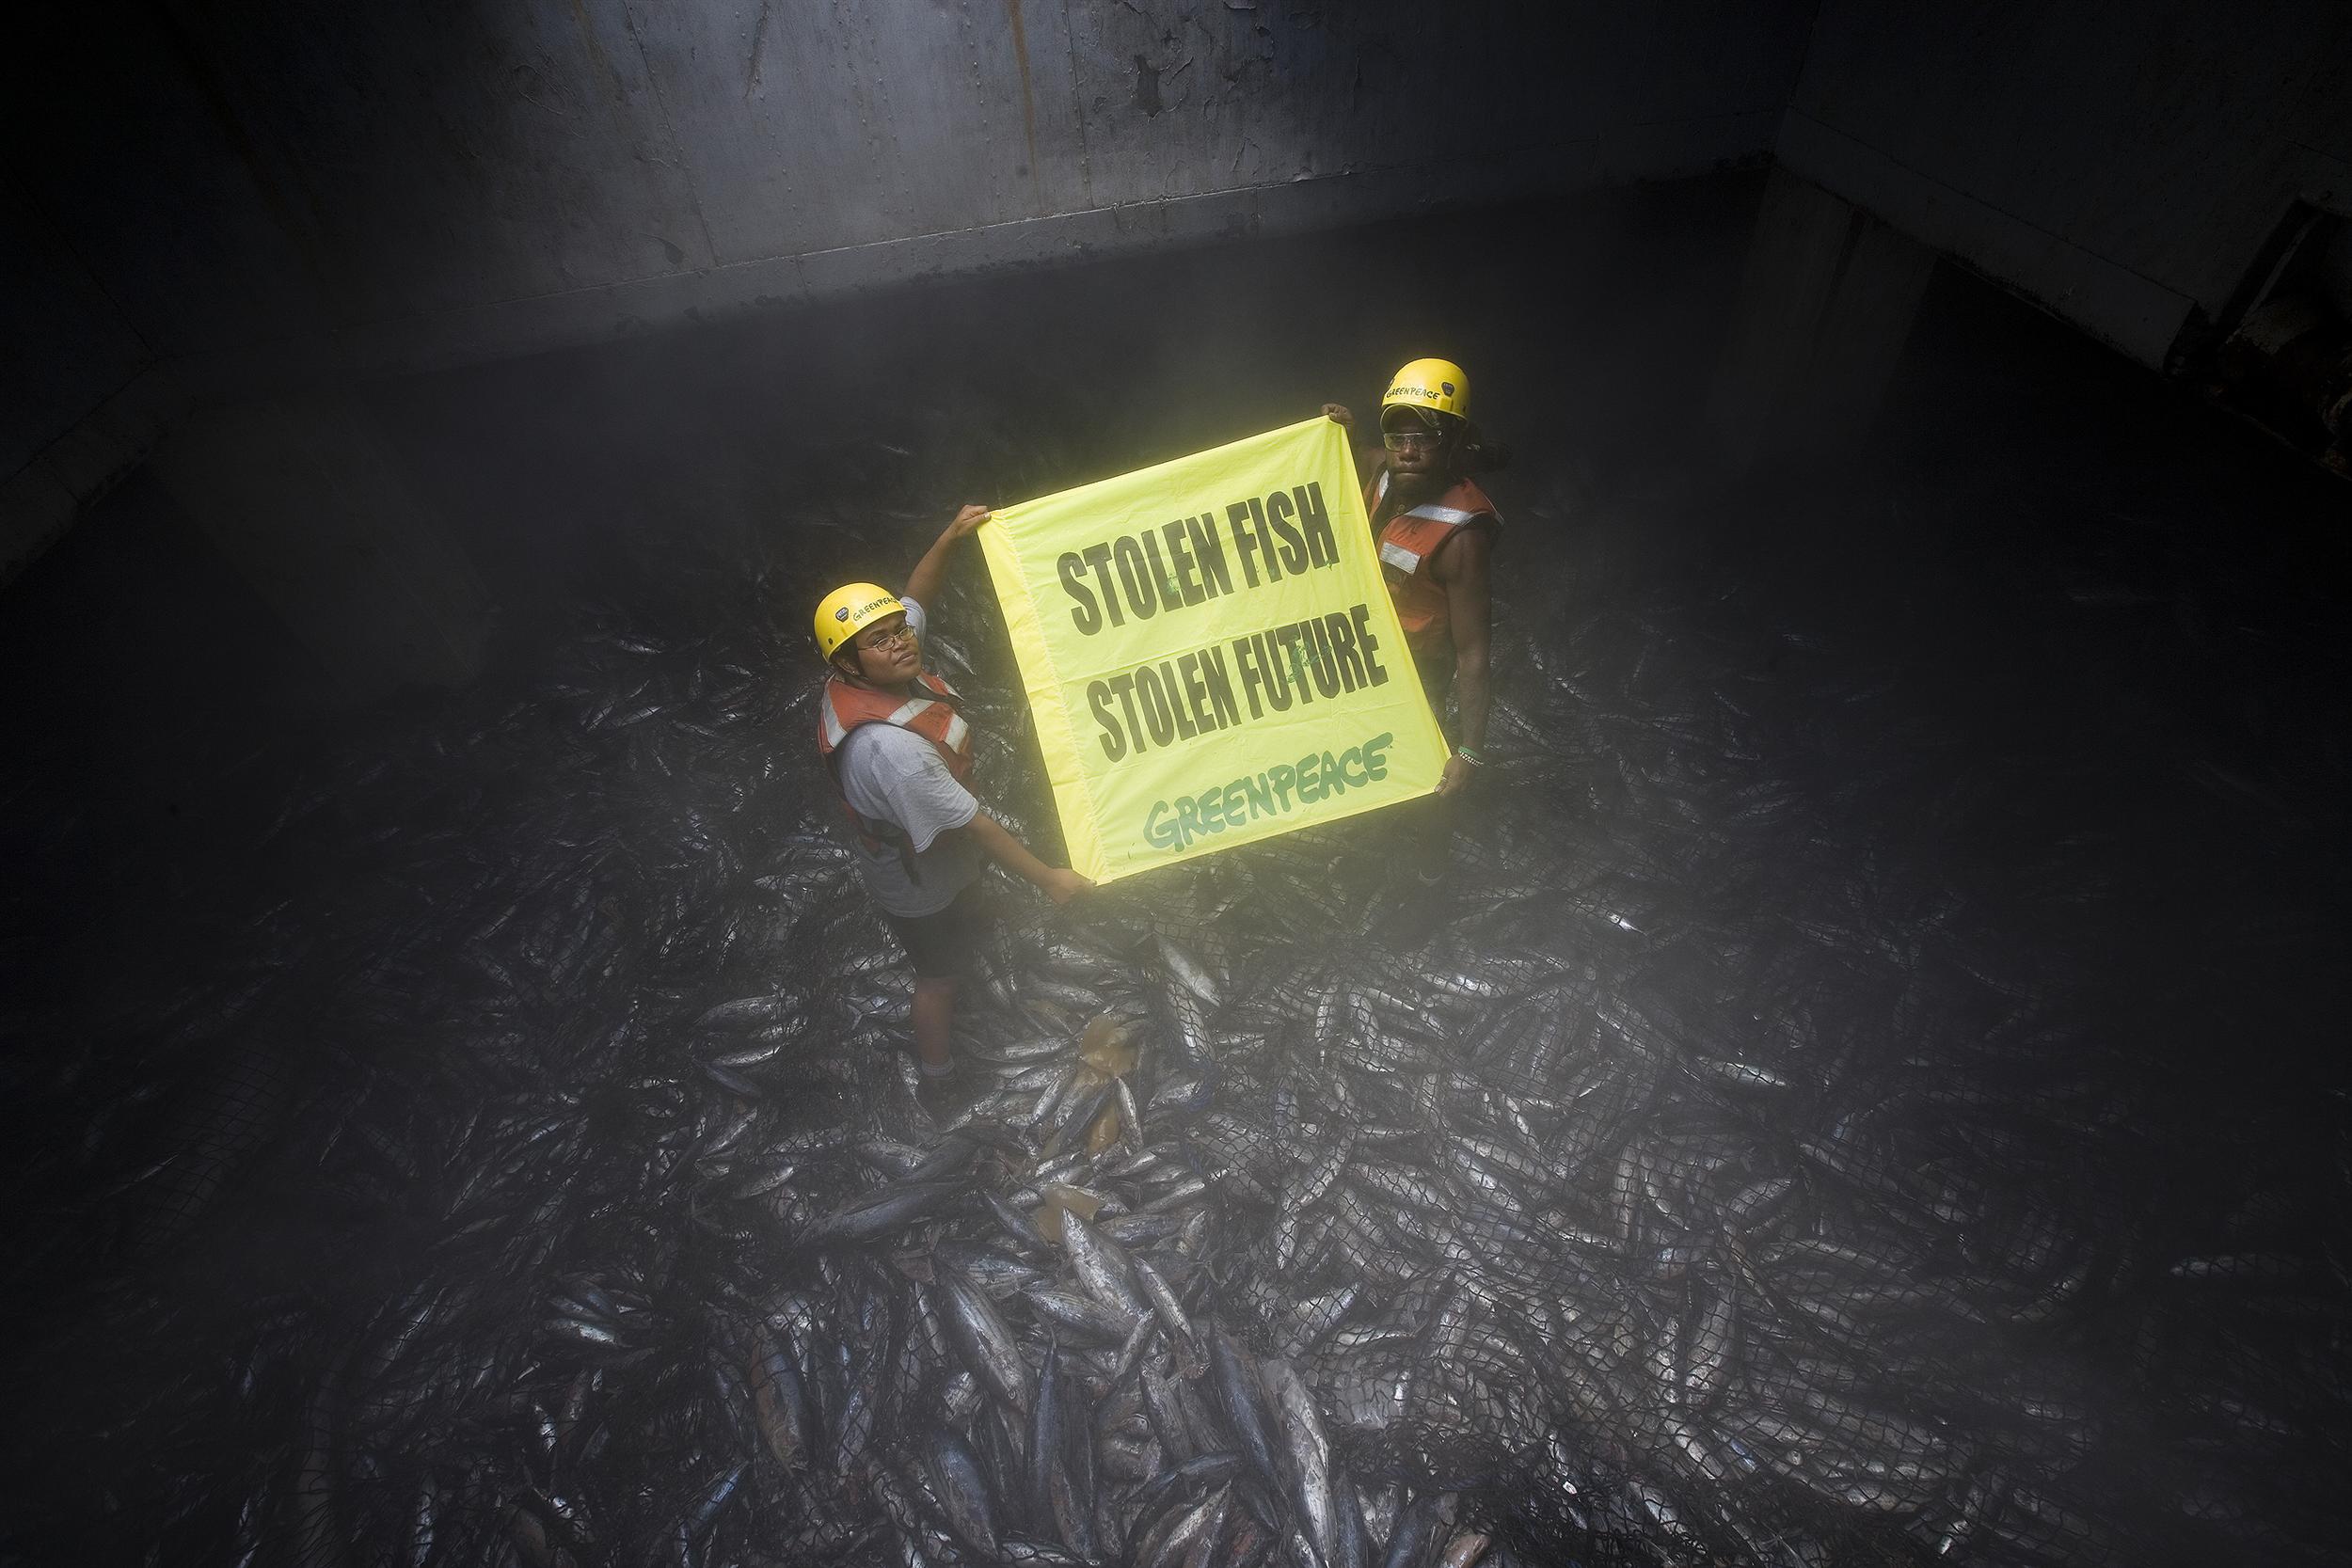 Activists Ana Jitoko and Danny Holland stand on juvenile yellowfin and skipjack tuna in the hold of Philippine mothership Kenken 888 holding a banner which reads 'Stolen fish, stolen future". The vessel has transferred the catches of six purse seiners at sea over the past month and was documented with a pirate purse seiner in close contact. Yellowfin and bigeye tuna are suffering from overfishing. Greenpeace is calling for the pockets of international waters between Pacific nations to become marine reserves. 